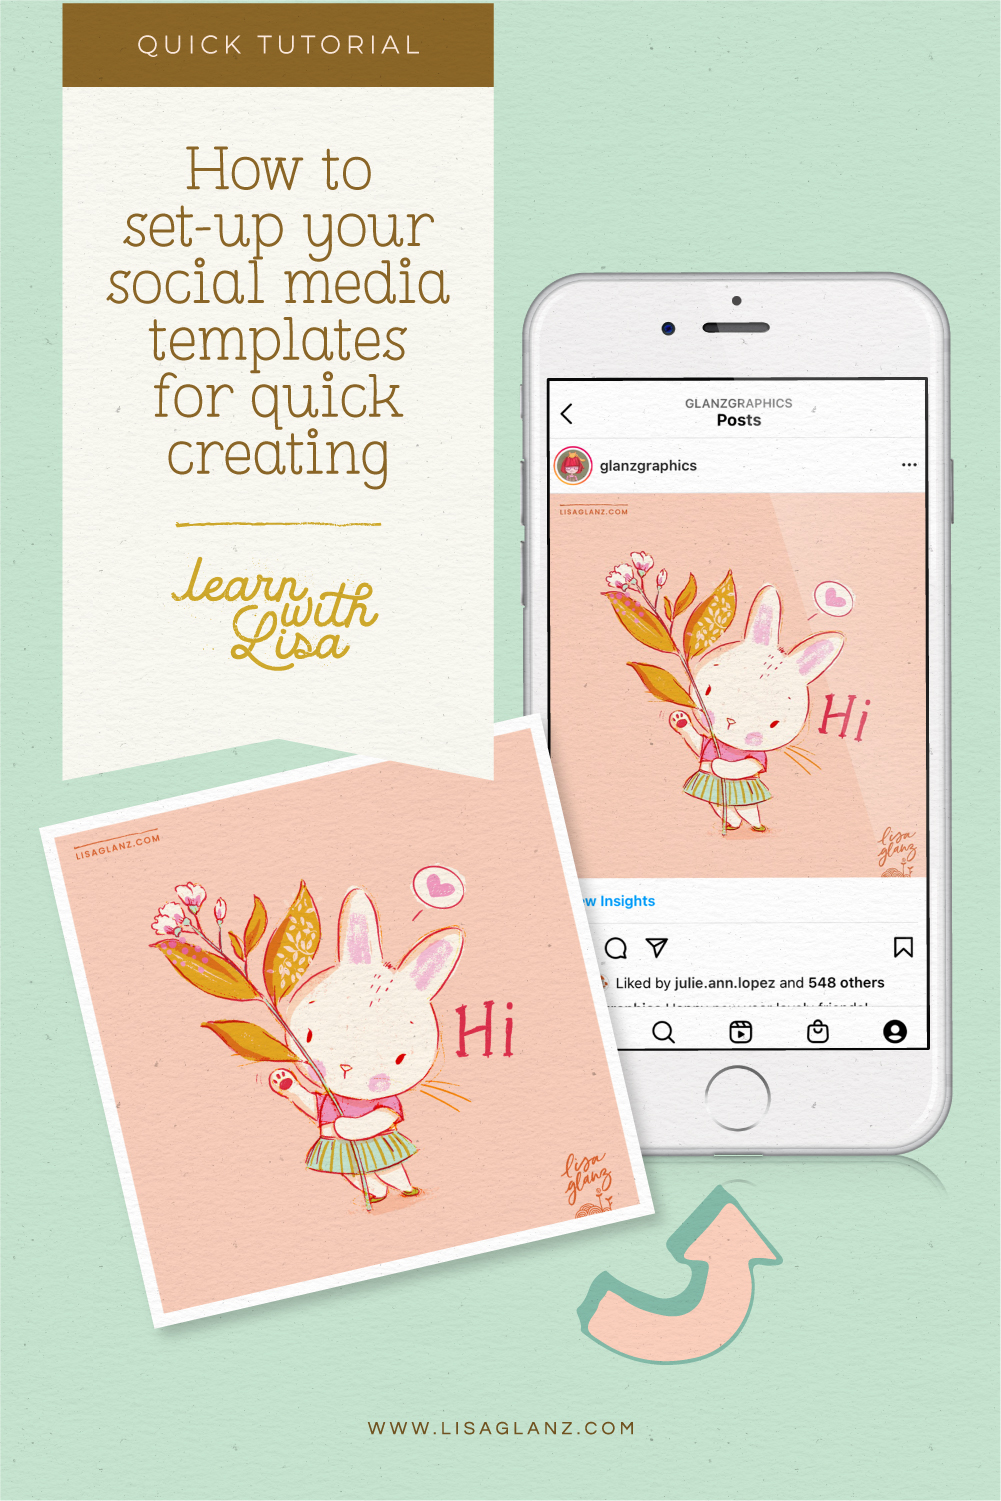 How I set-up my social media templates for quick creating